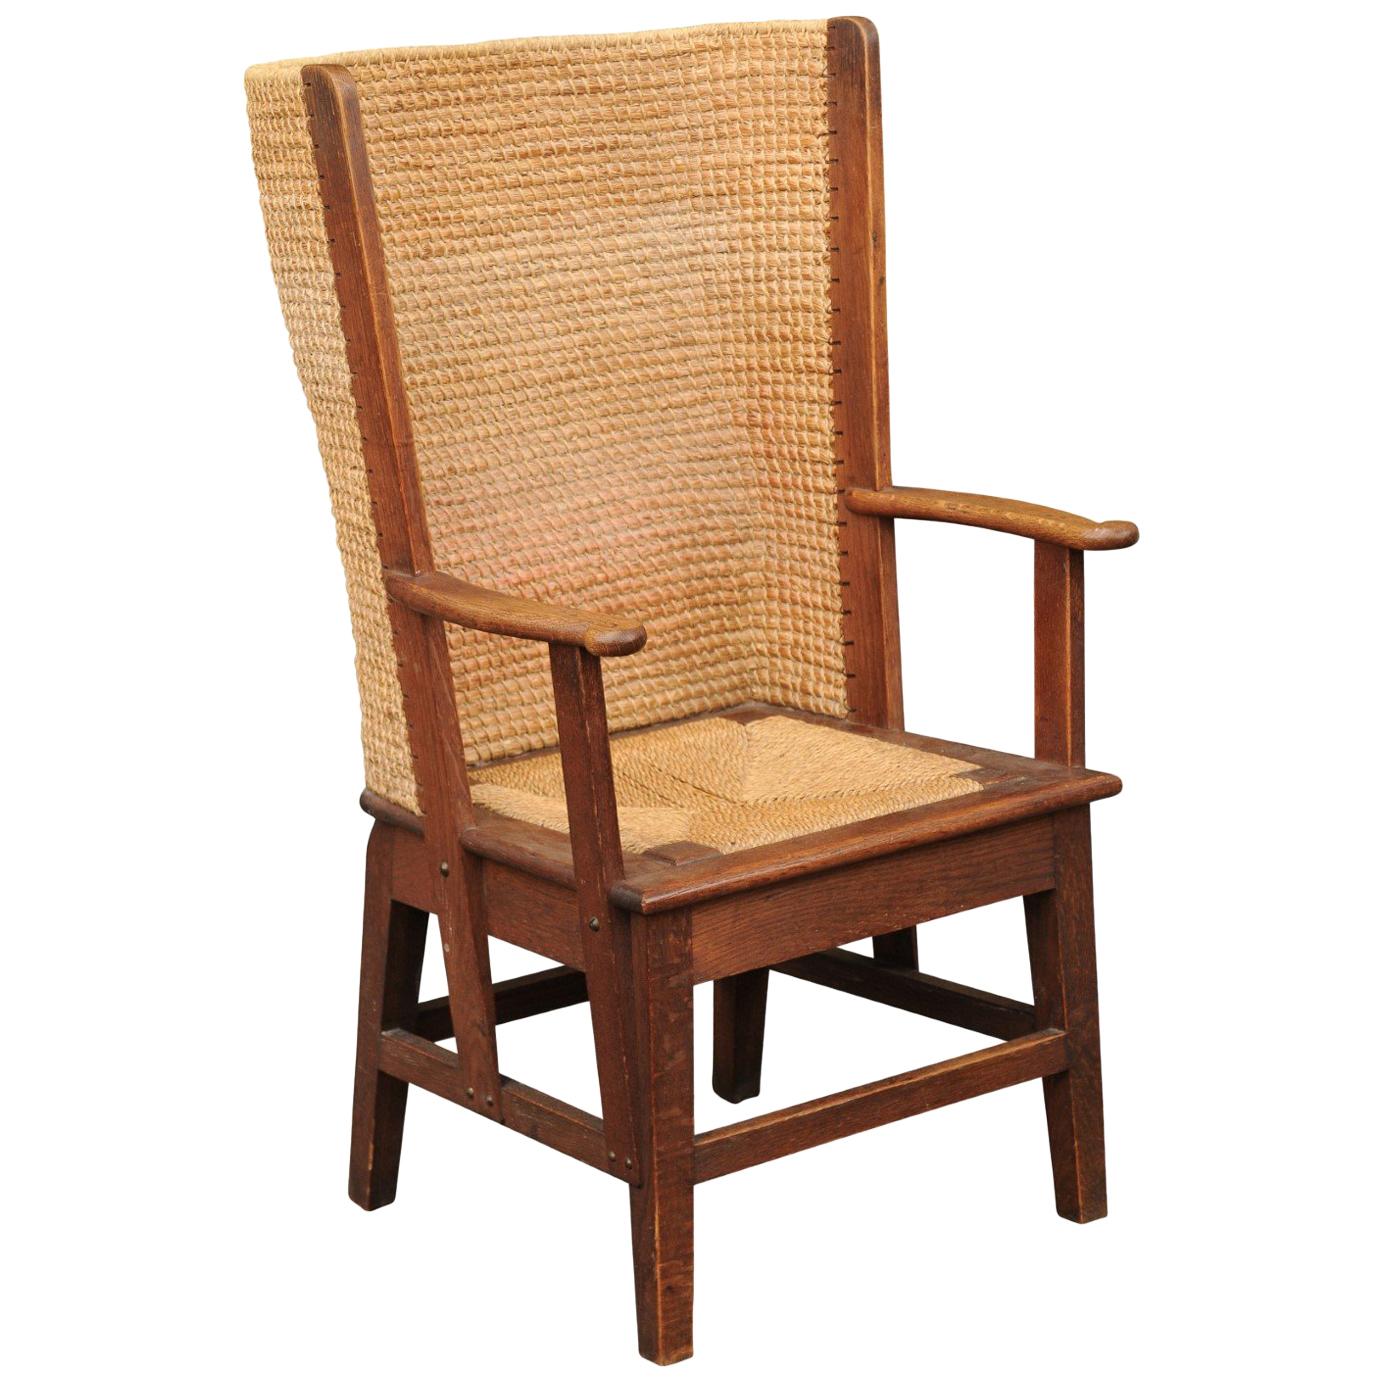 Late 19th Century Oak Orkney Island Wingback Chair with Handwoven Straw Back